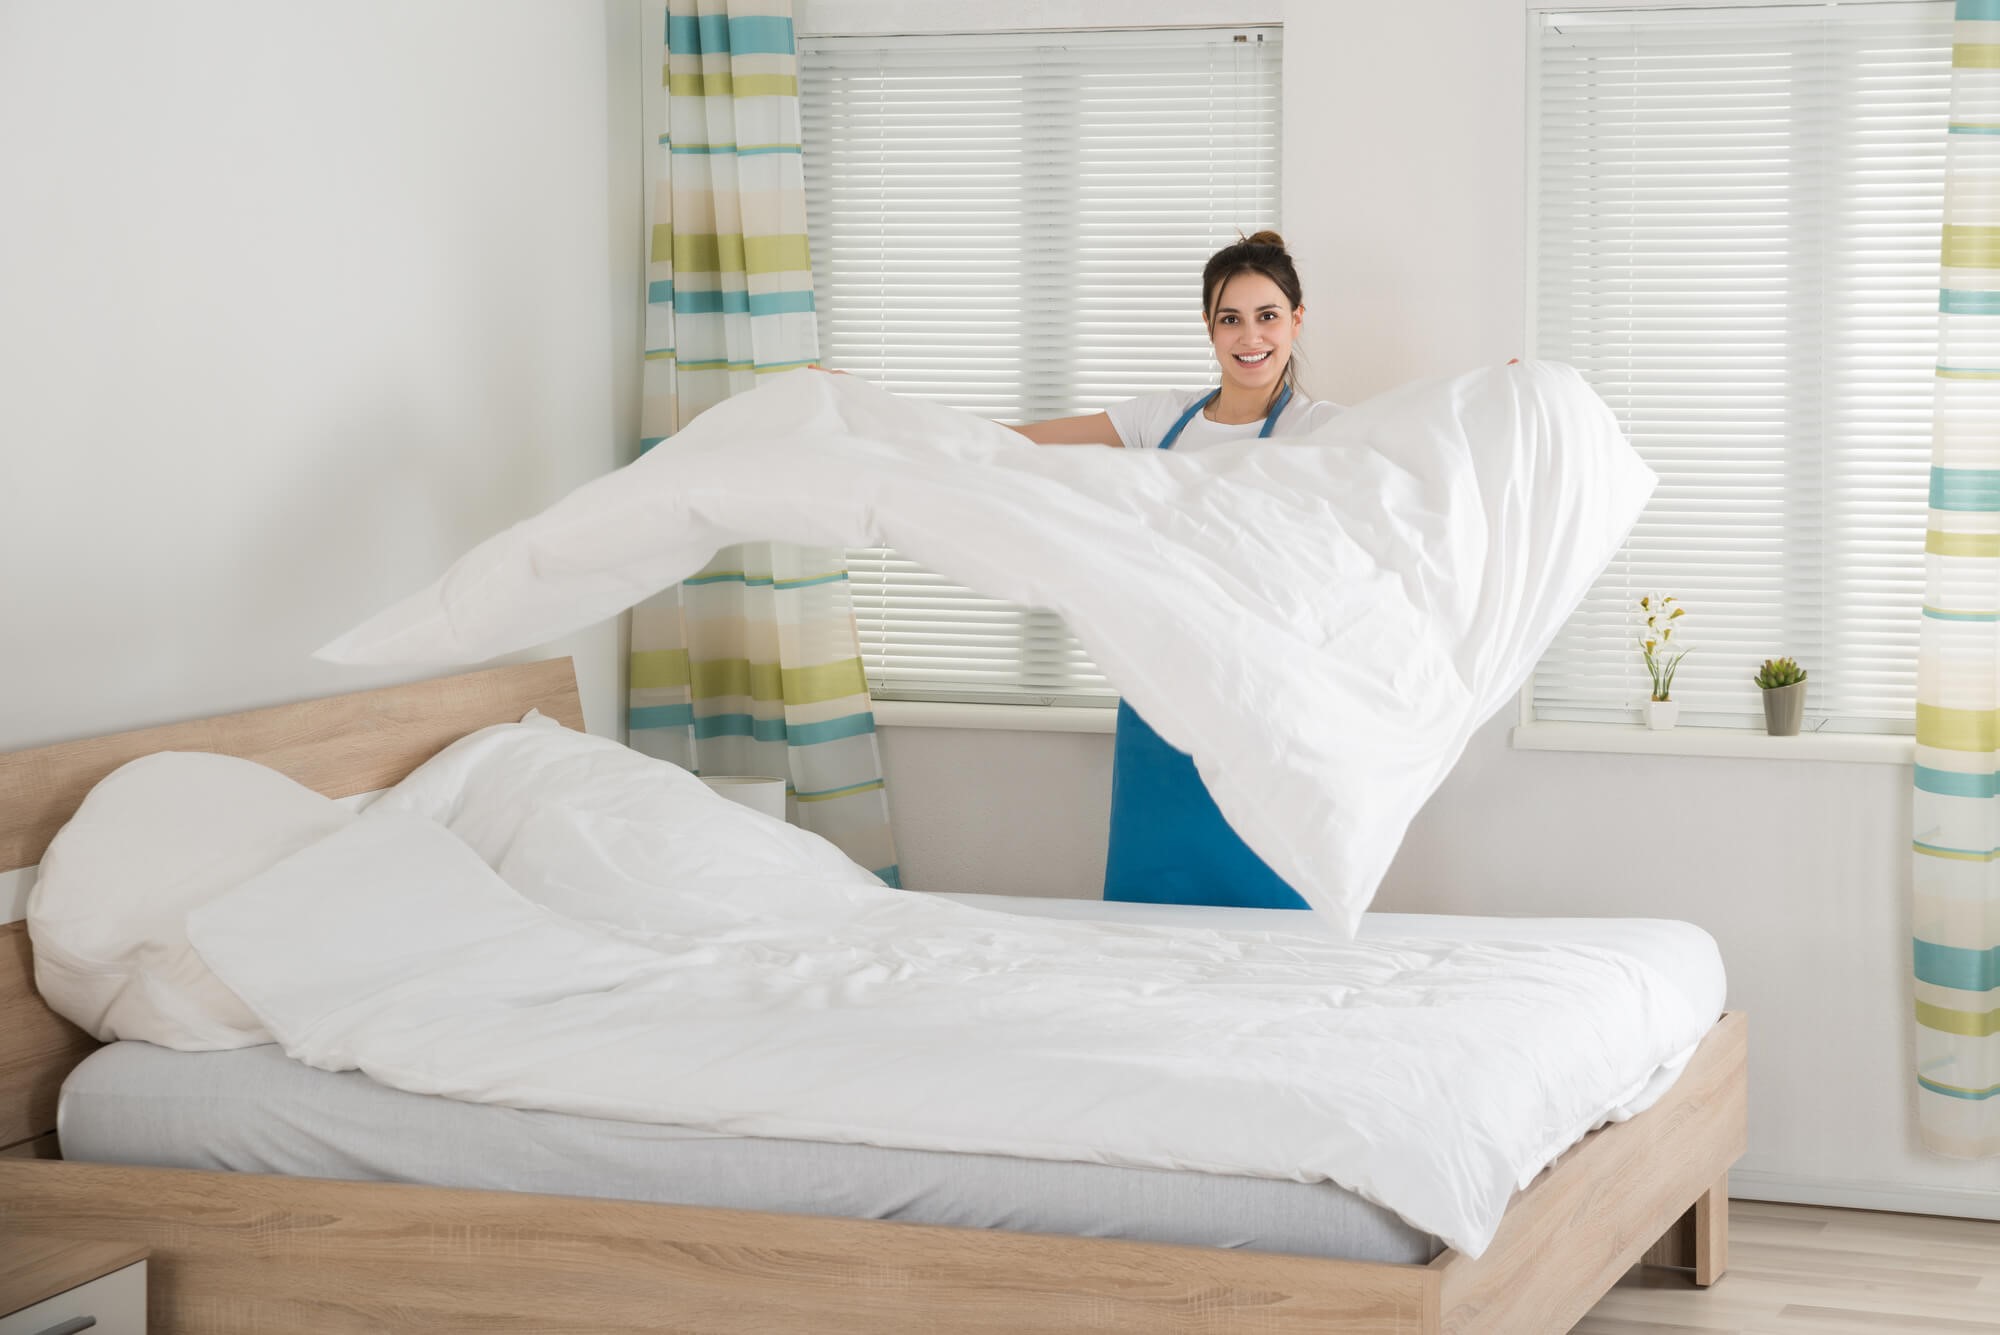 How to Get Pee Out of a Mattress: 6 Easy Steps